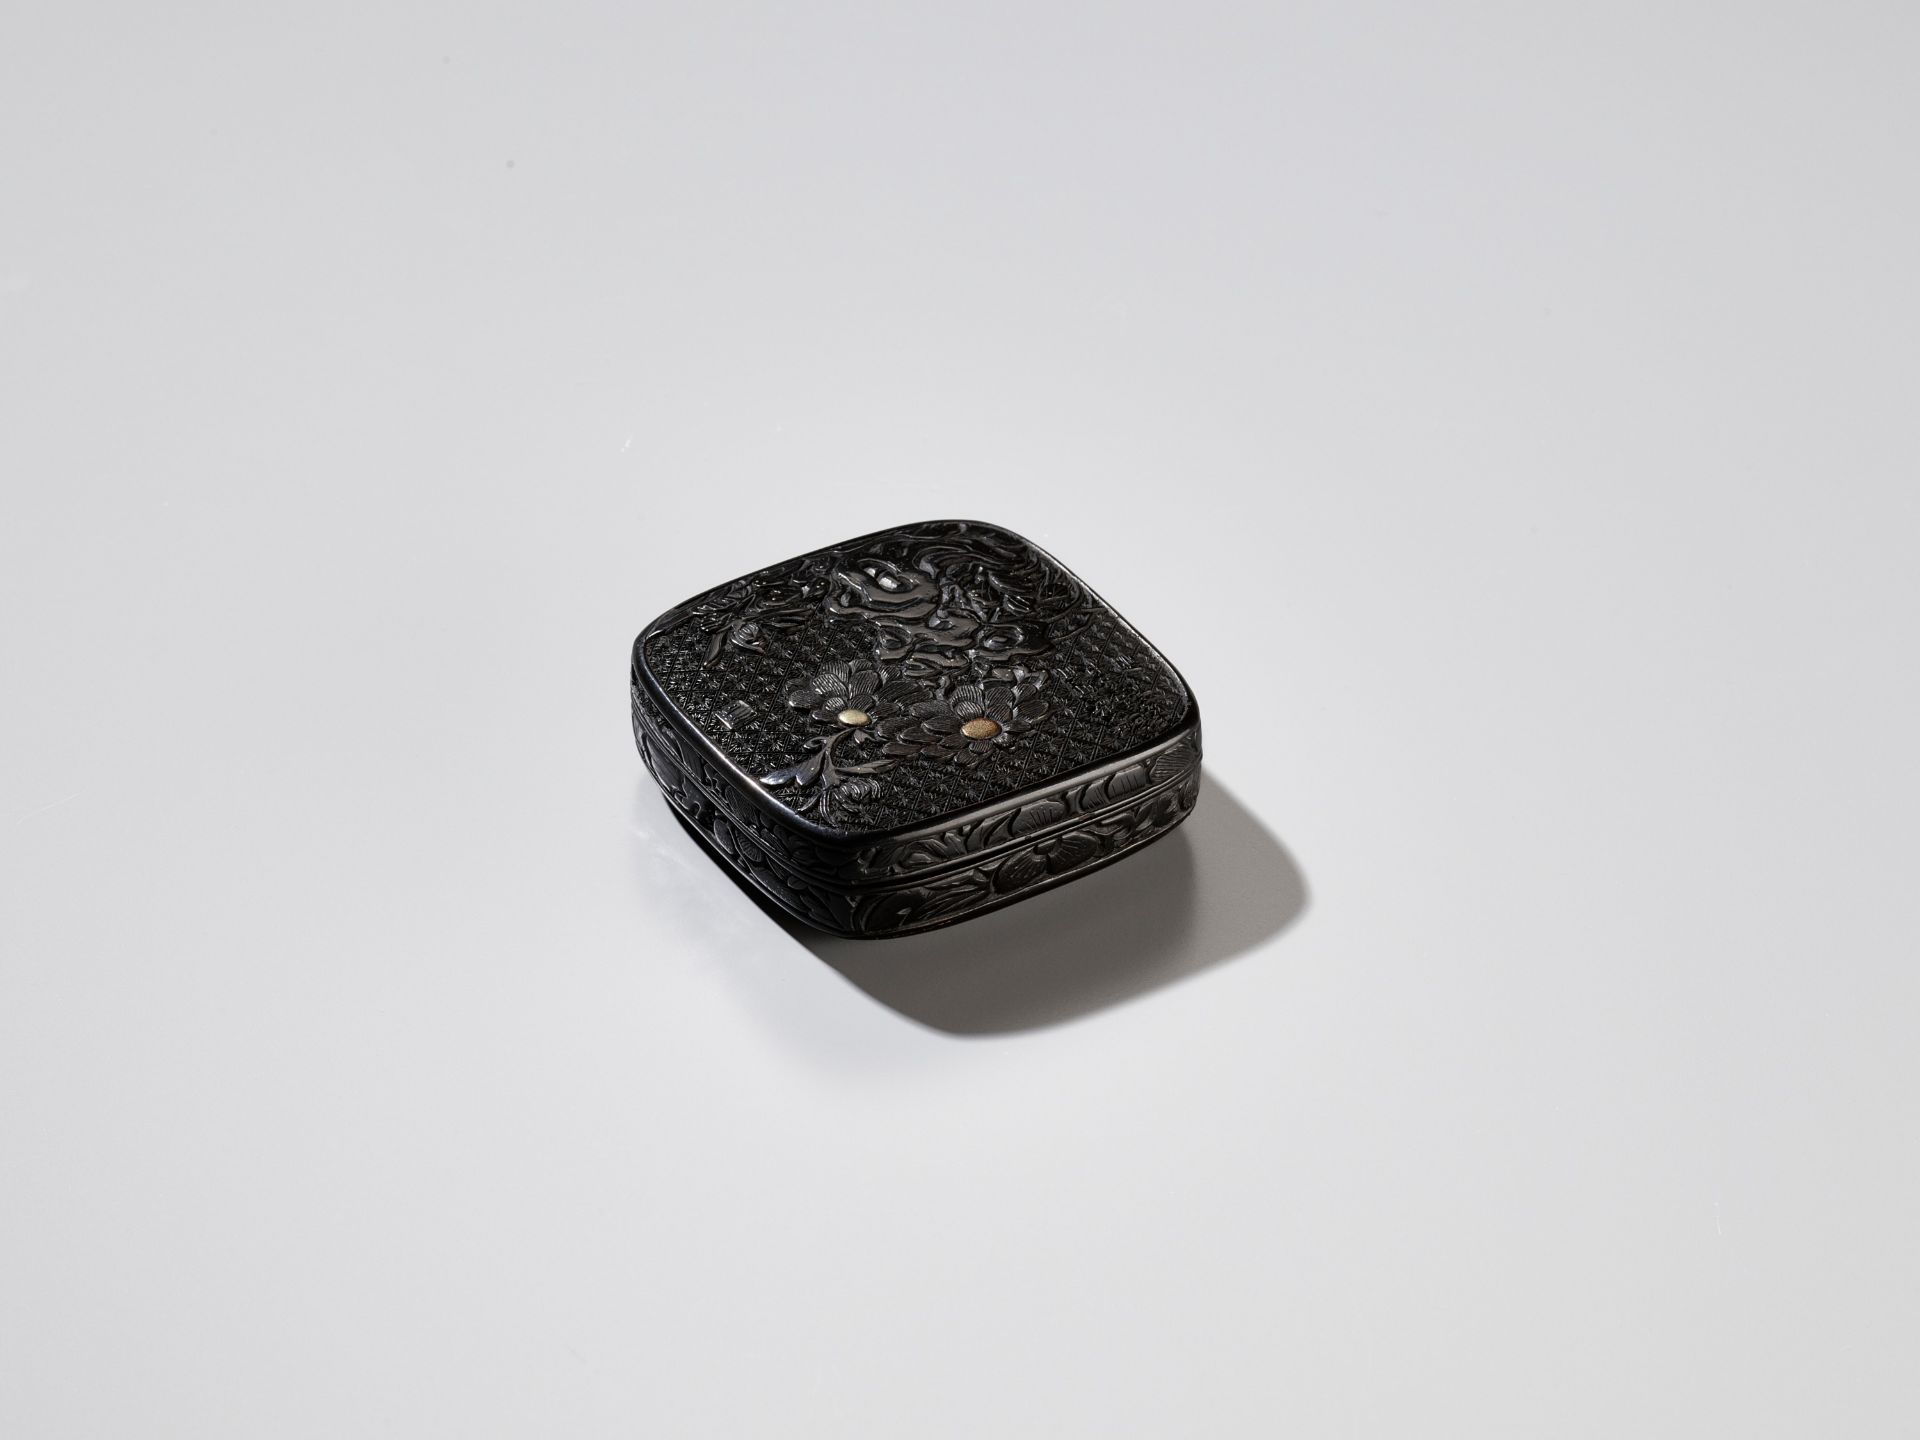 A RARE TSUIKOKU (CARVED BLACK LACQUER) KOGO (INCENSE BOX) AND COVER WITH CHRYSANTHEMUMS AND POEM - Image 6 of 10